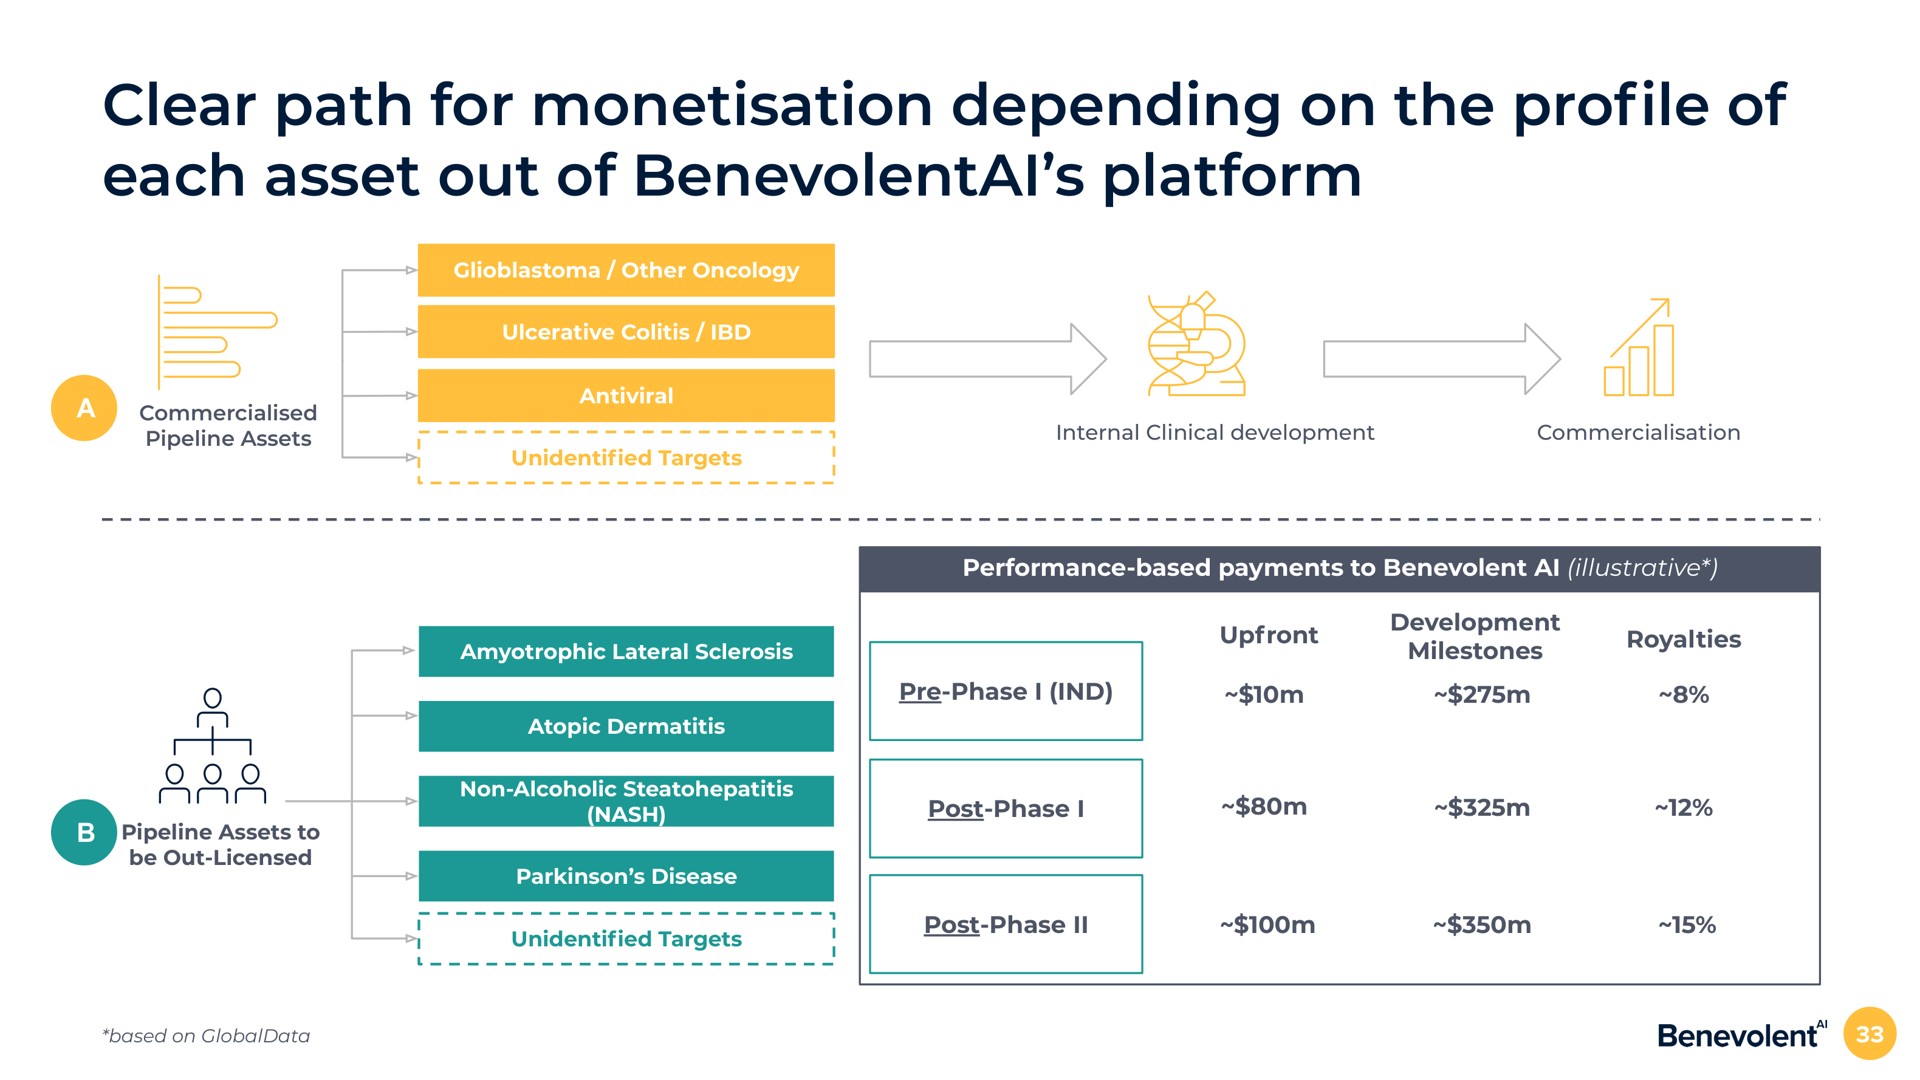 clear path for depending on the pro of each asset out of platform a performance based payments to benevolent illustrative development milestones royalties phase i post phase i post phase profile | BenevolentAI